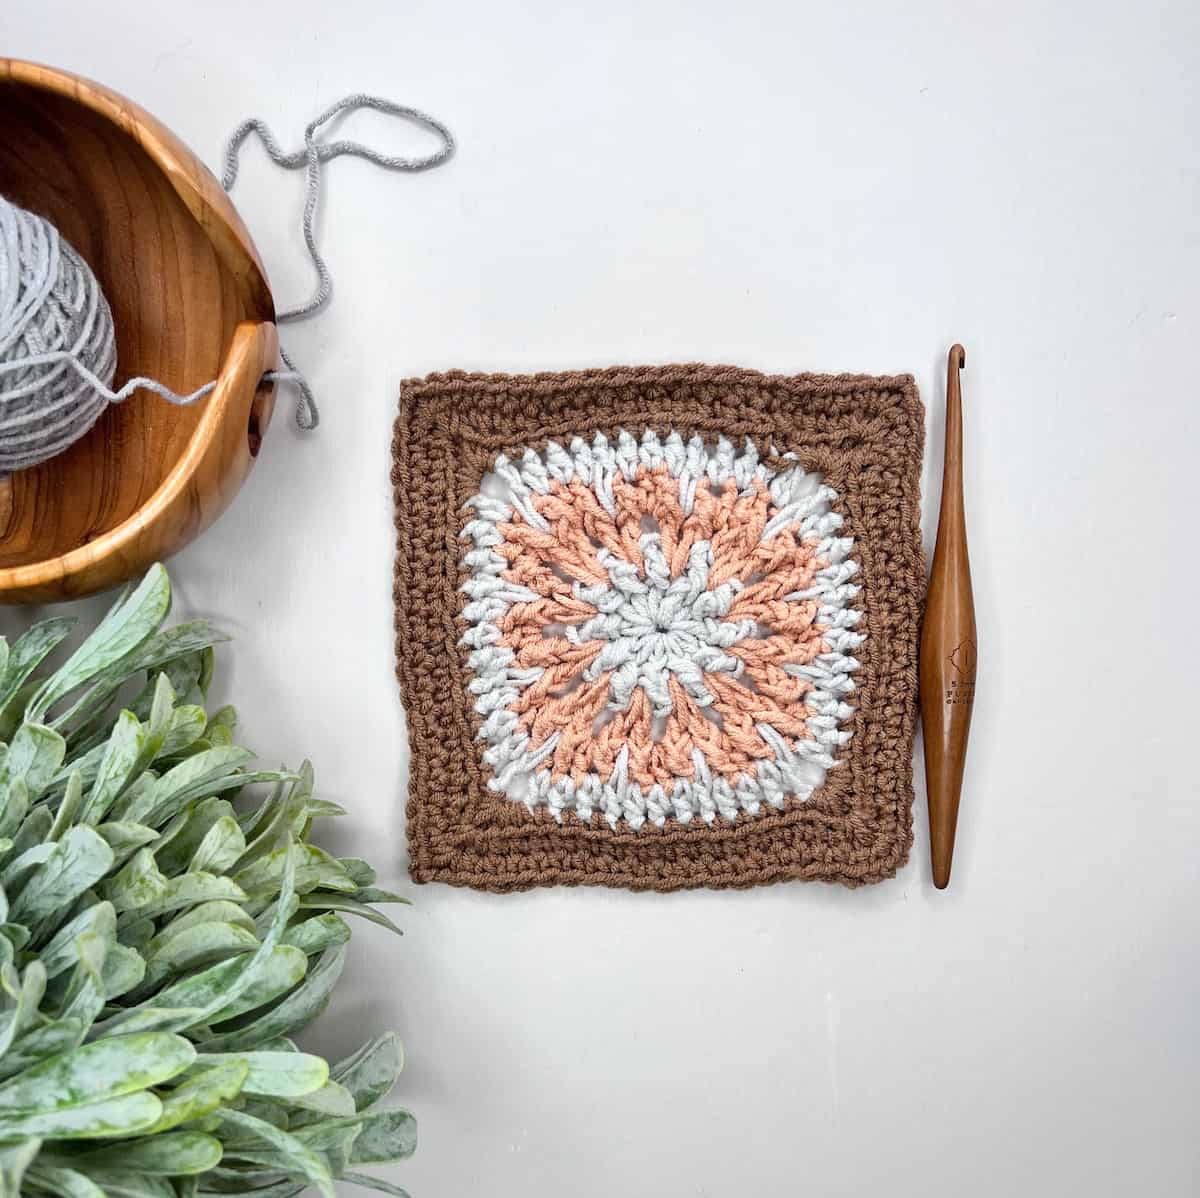 Guide to Granny Crochet: Squares, Circles, Hearts, Stripes and More